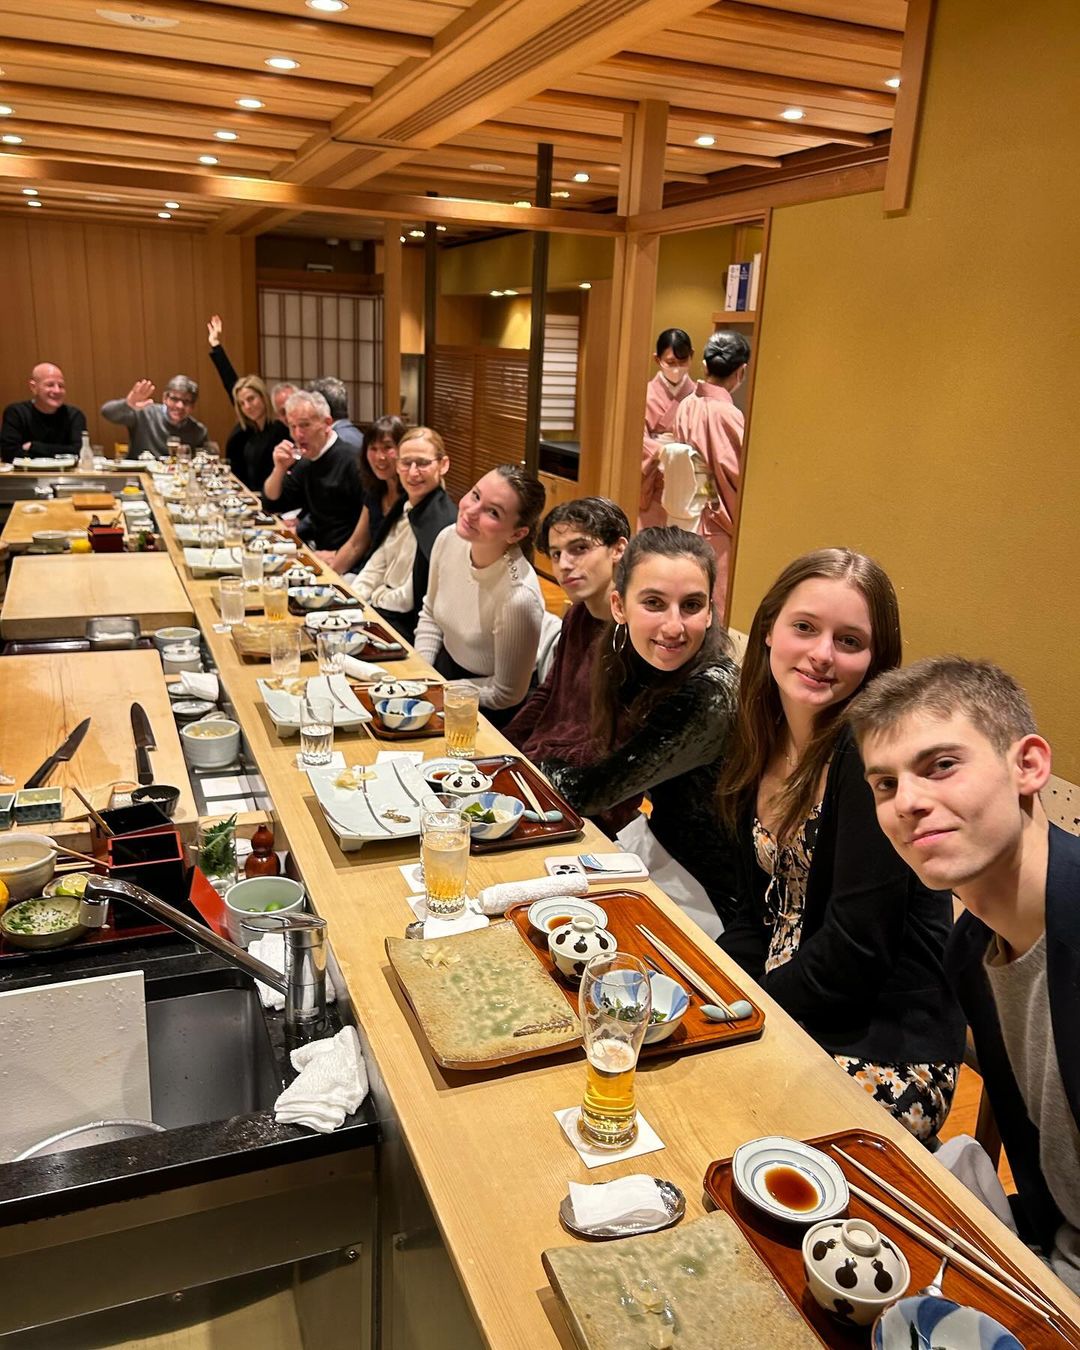 The group enjoyed the exhibits at the TeamLabs museum and ate sushi at a restaurant